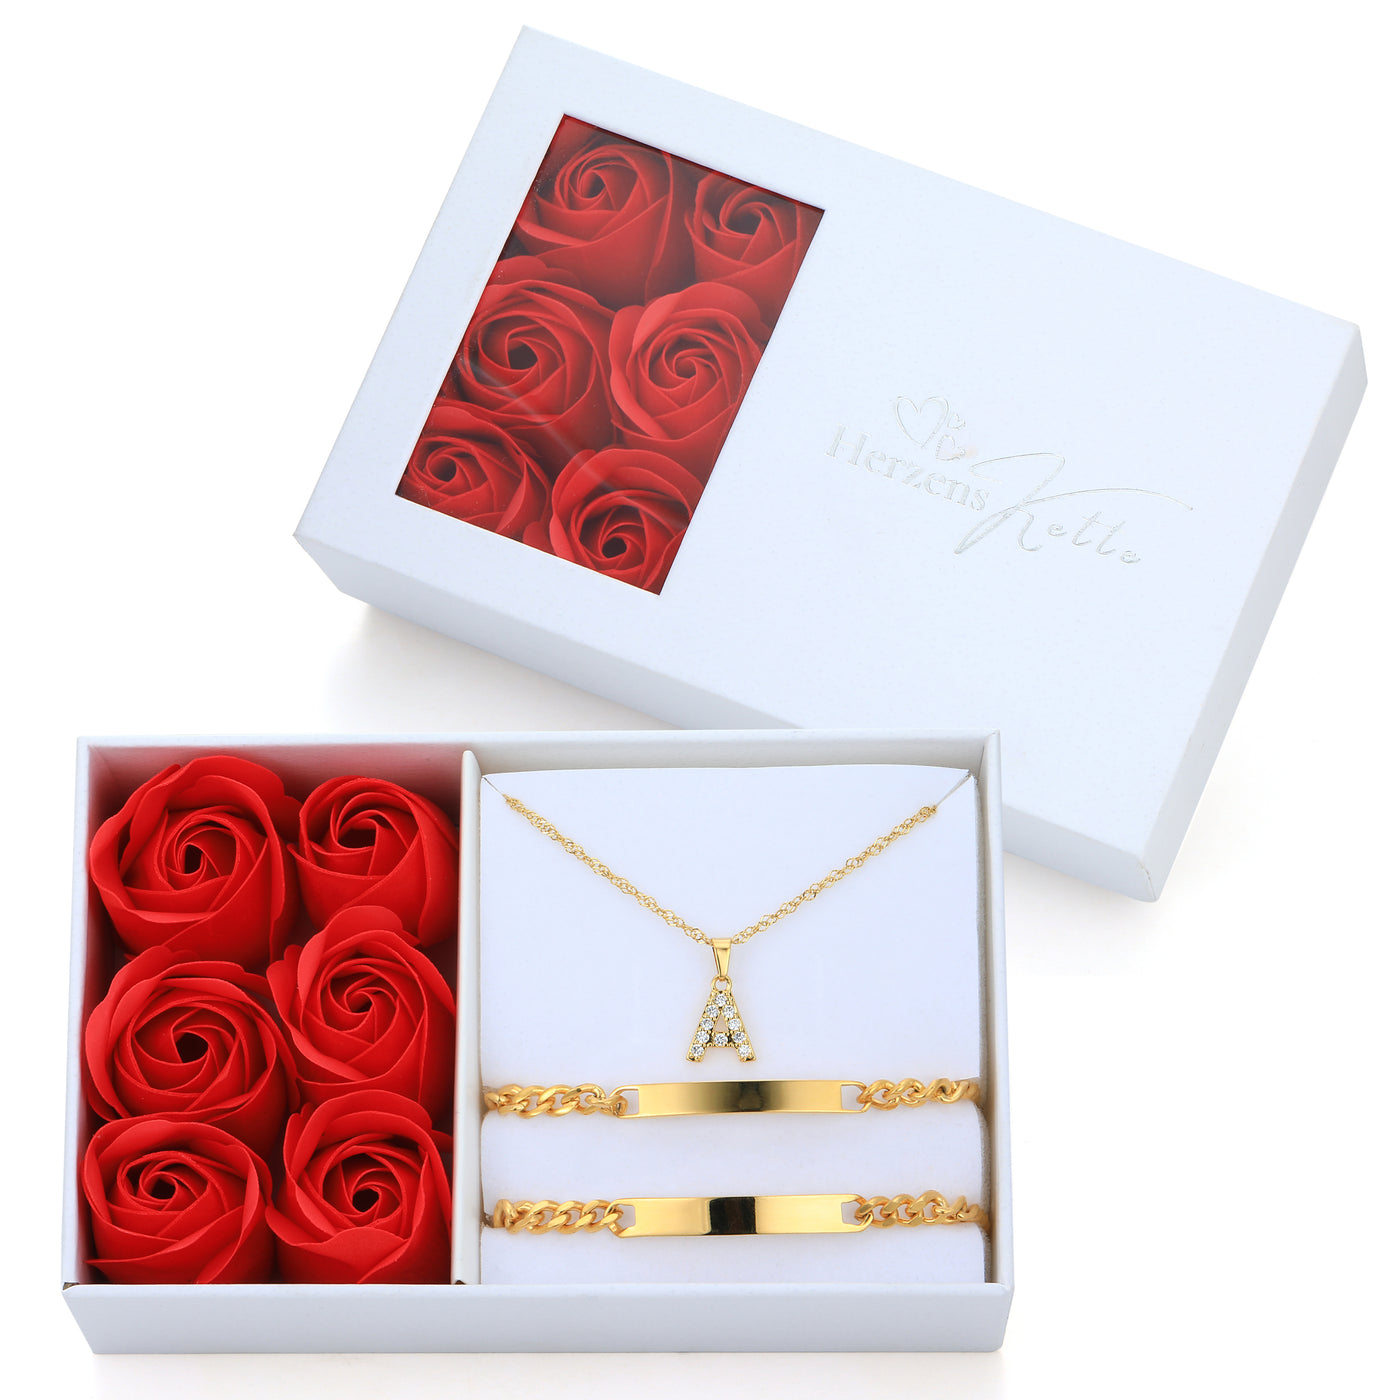 Rose box - perfect as a gift